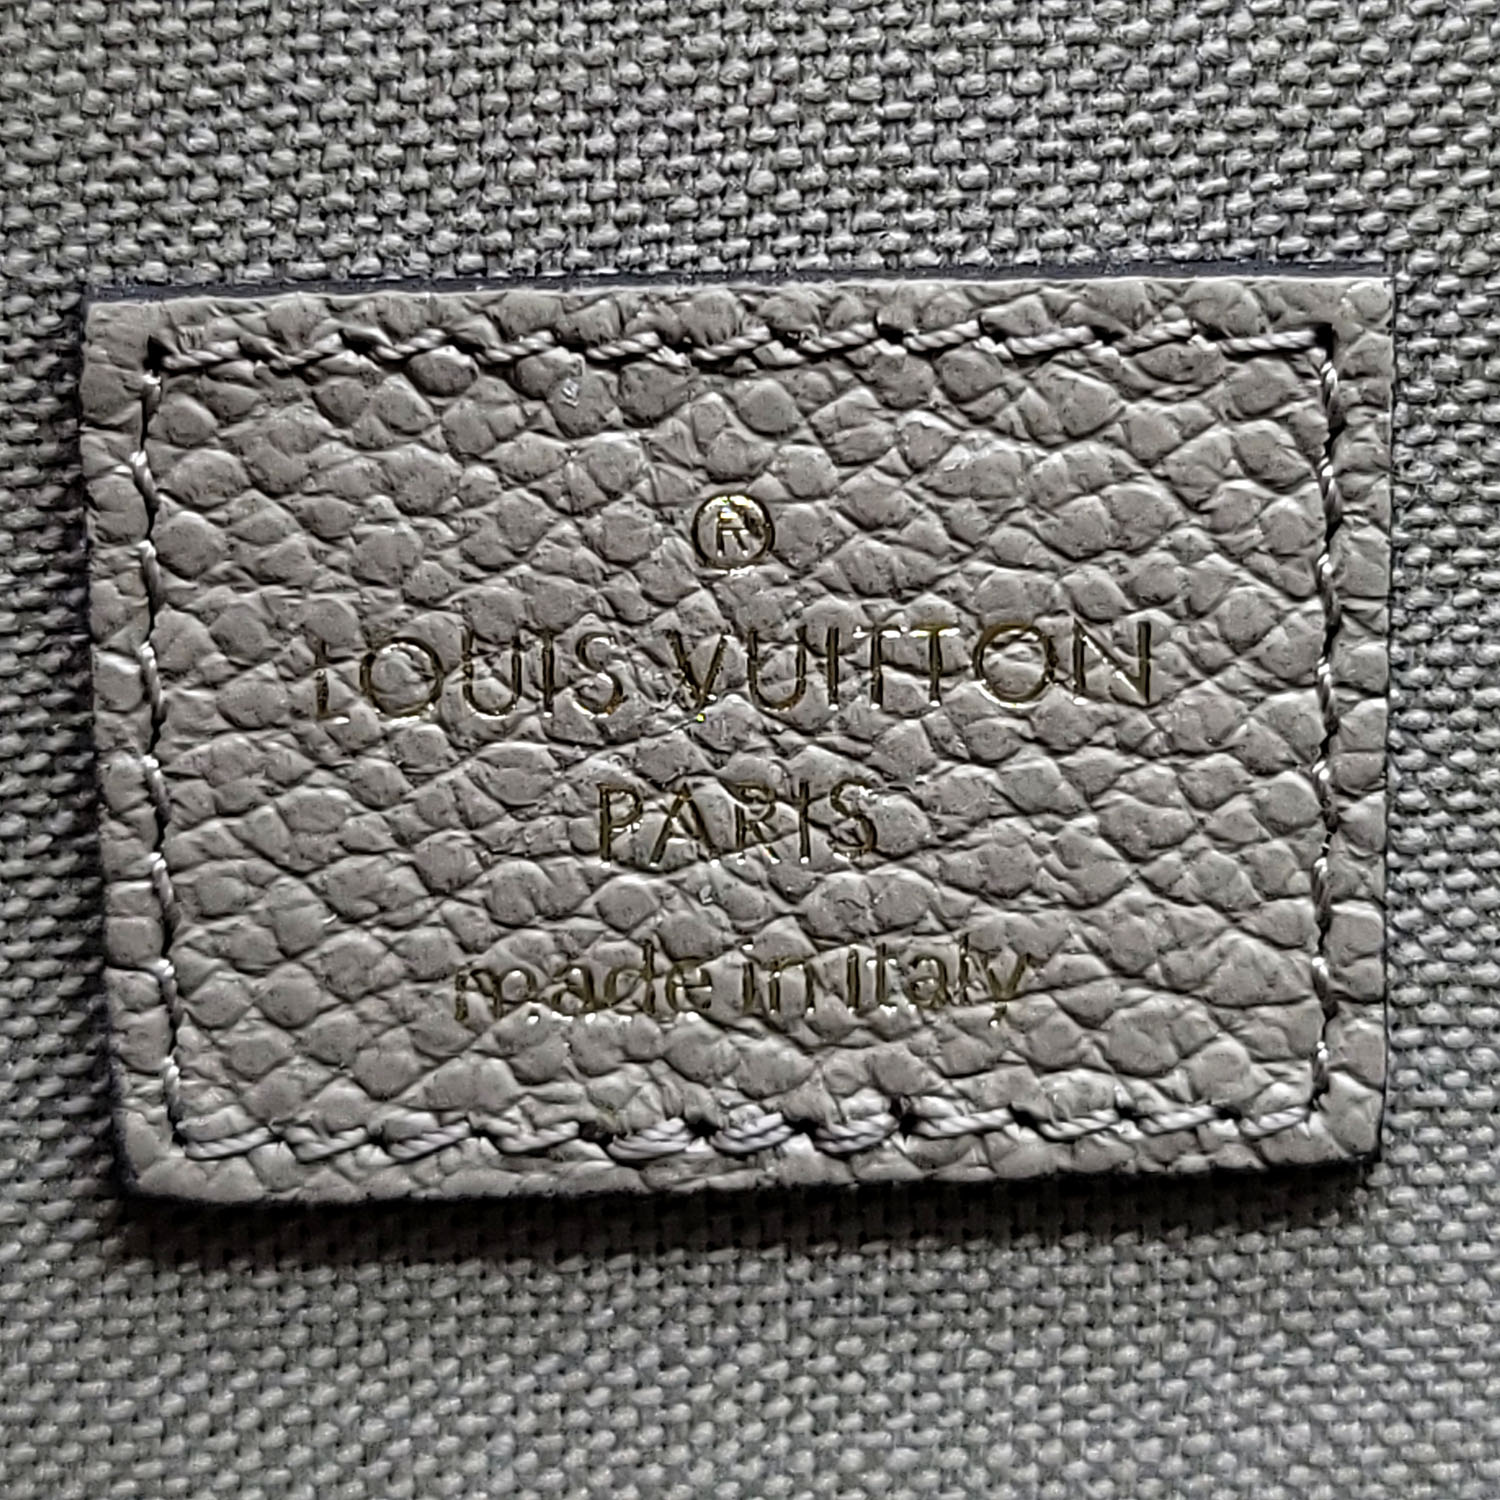 I finally got the Bicolor Pochette Felicie direct from LV, without